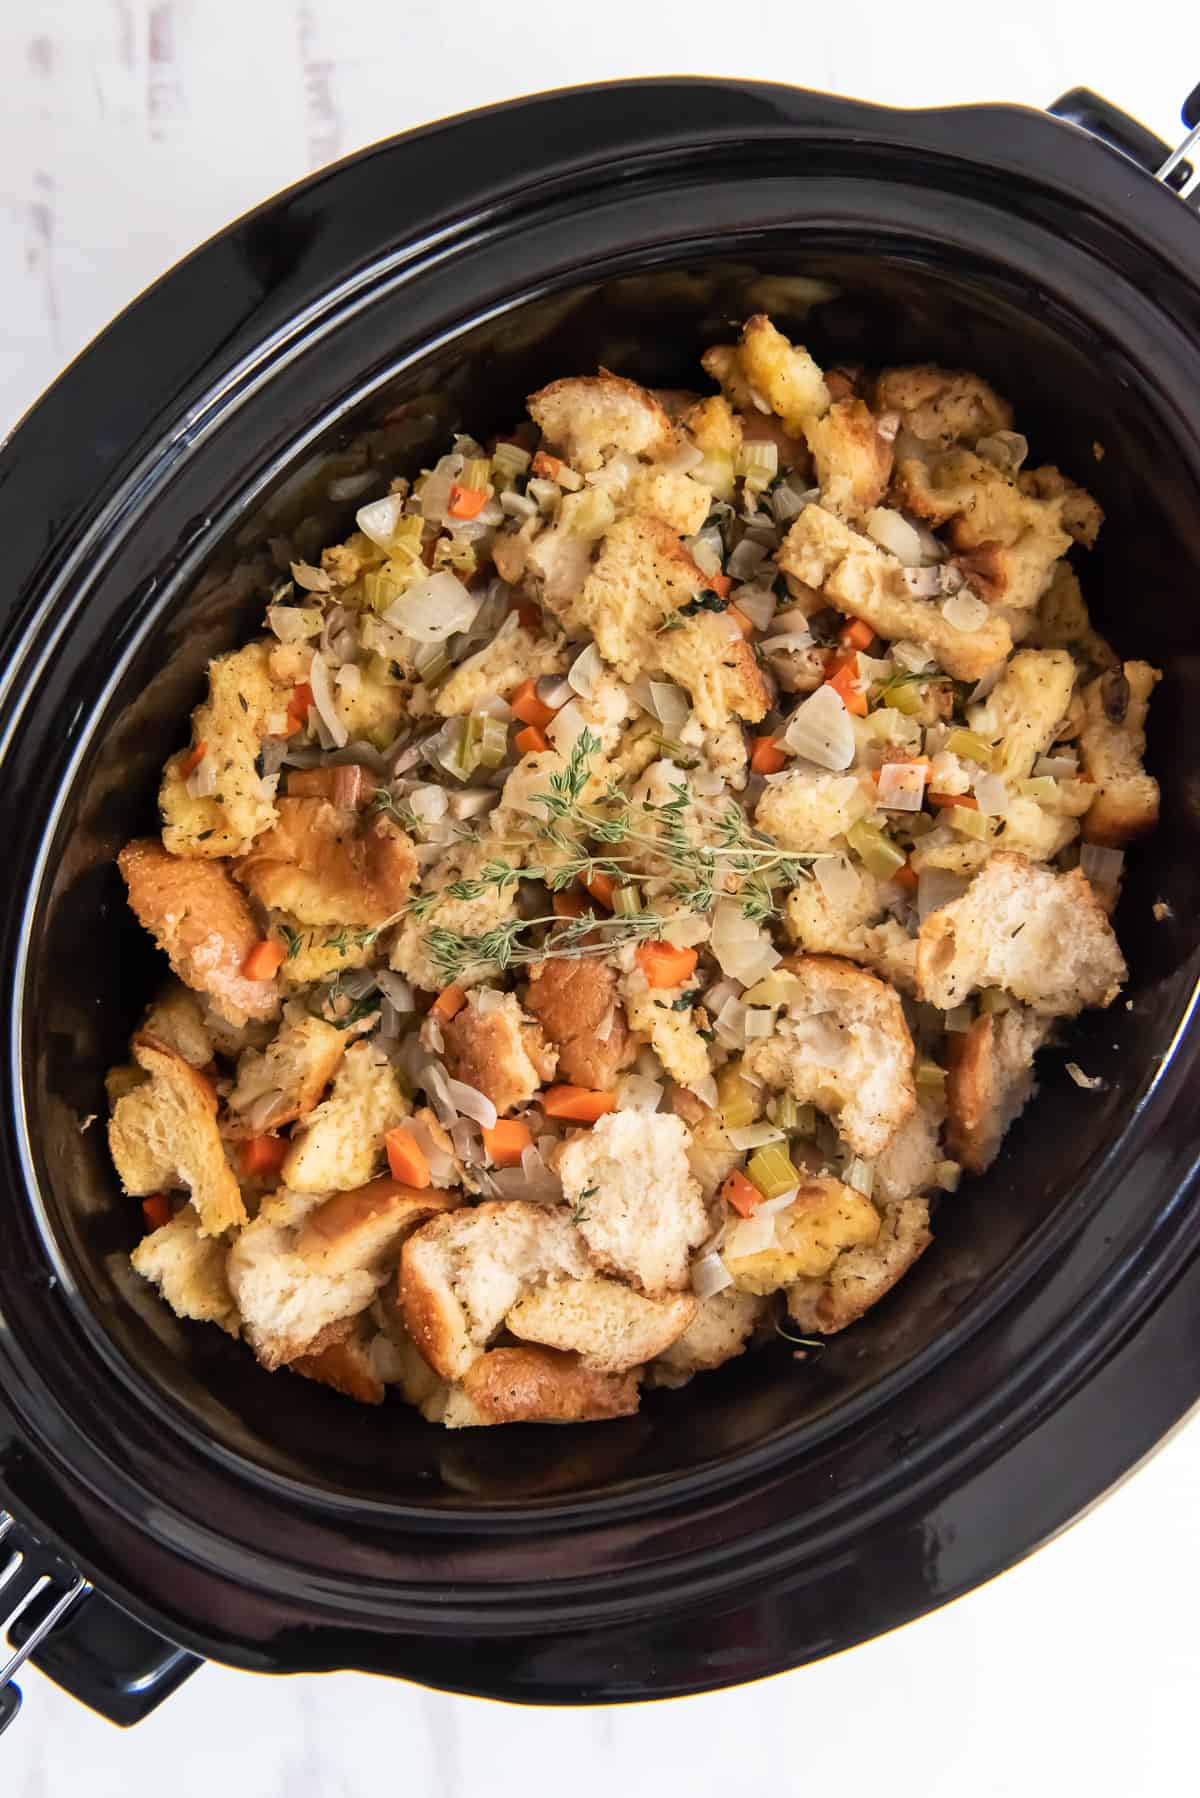 An over the top shot of stuffing in a slow cooker.